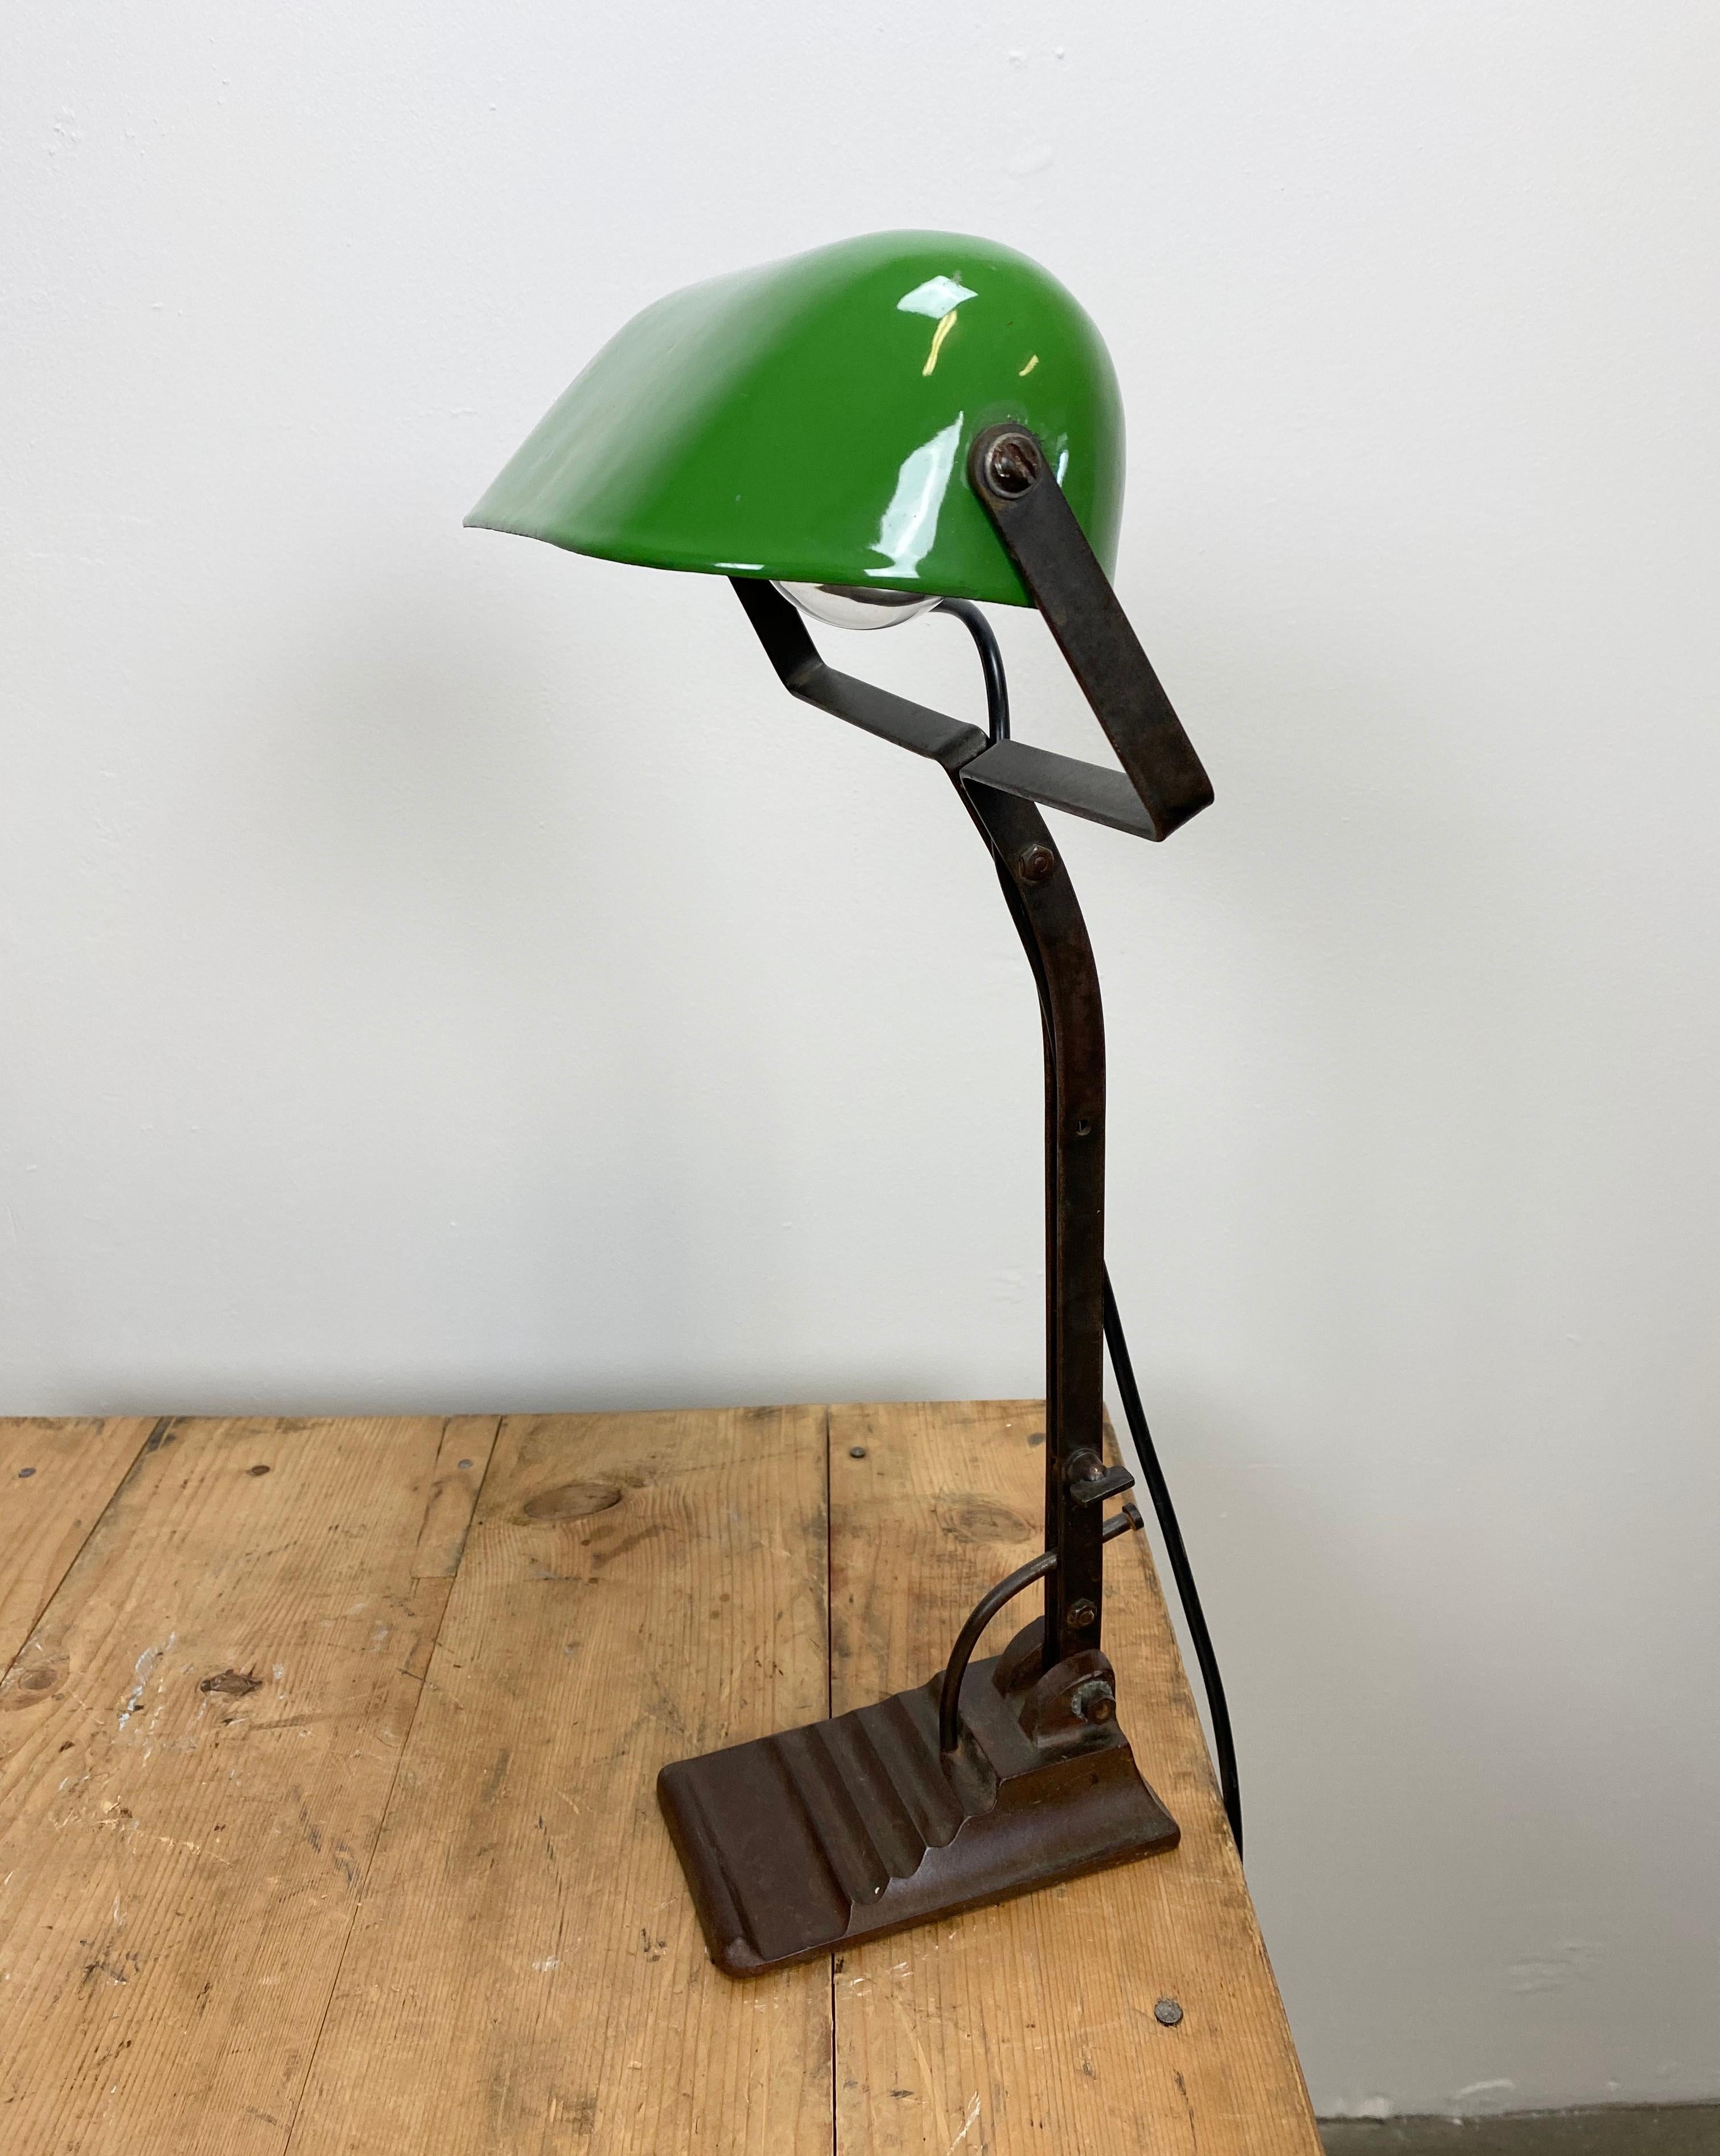 Vintage green table lamp from 1930s in Bauhaus style. Cast iron base. Green enameled iron shade. White enameled interior. The arm and shade are adjustable. Porcelain socket for E 27 light bulbs. Fully functional. Dimensions of the lampshade: 22cm x